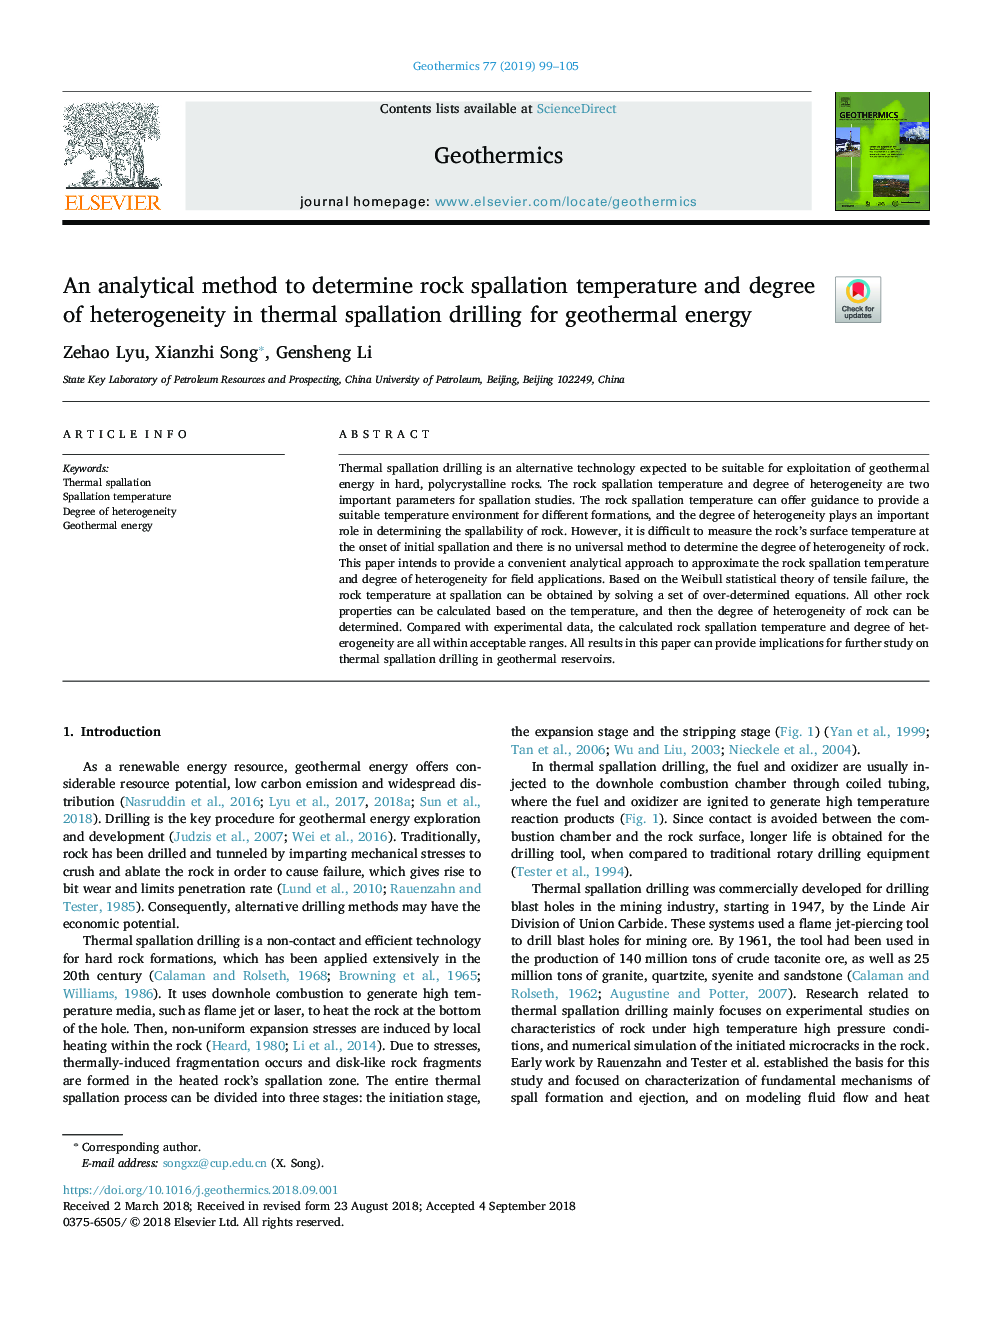 An analytical method to determine rock spallation temperature and degree of heterogeneity in thermal spallation drilling for geothermal energy